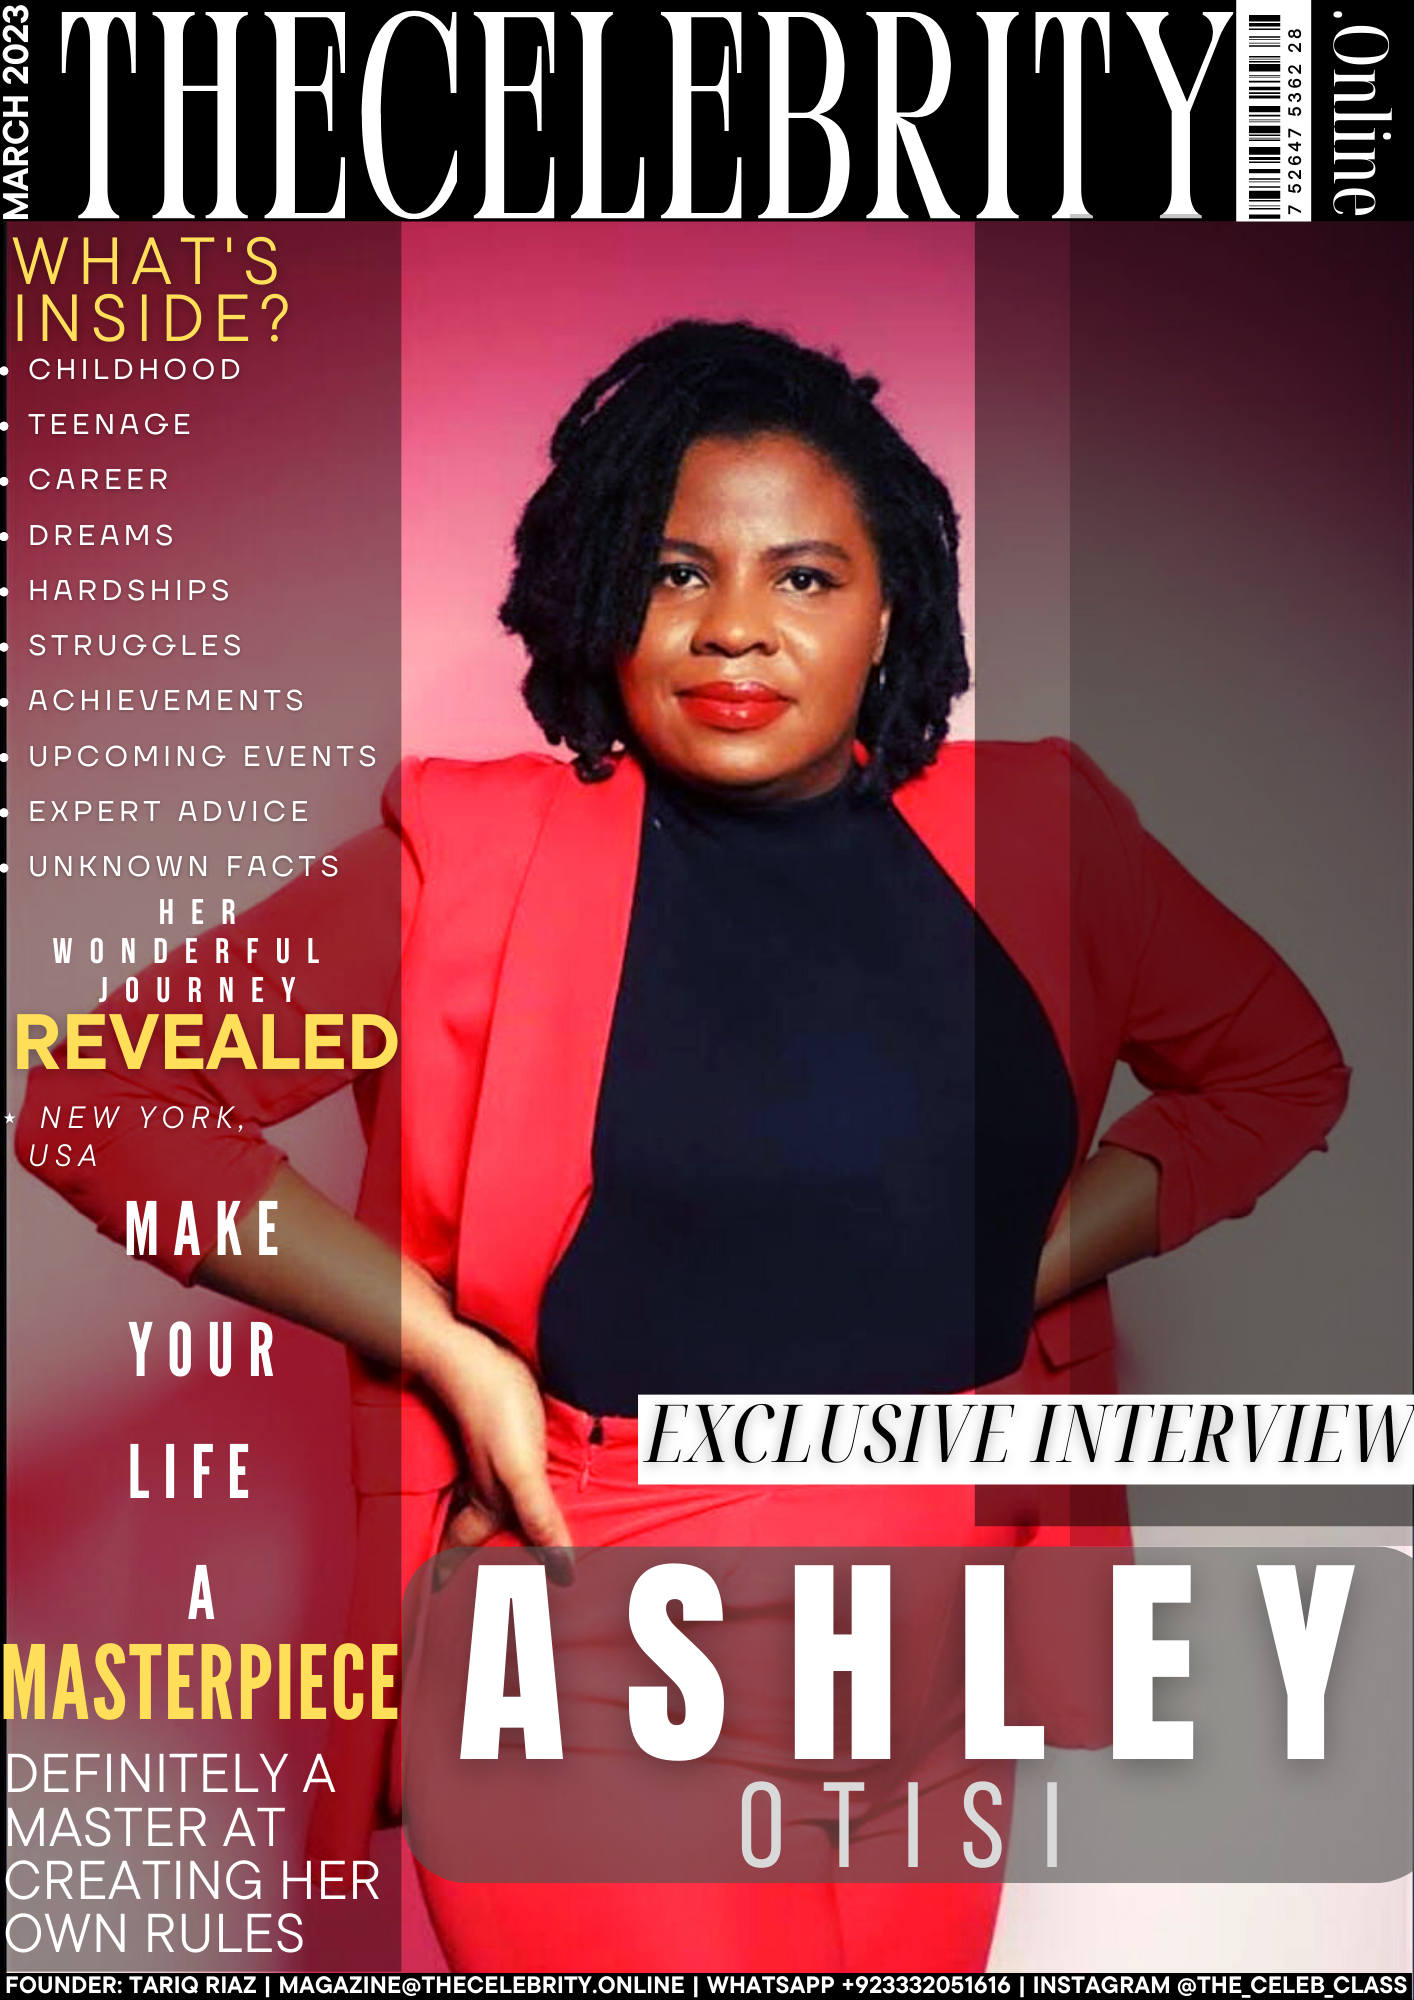 Ashley Otisi Exclusive Interview – ‘Never Give Up And Look Beyond Your Difficulties’